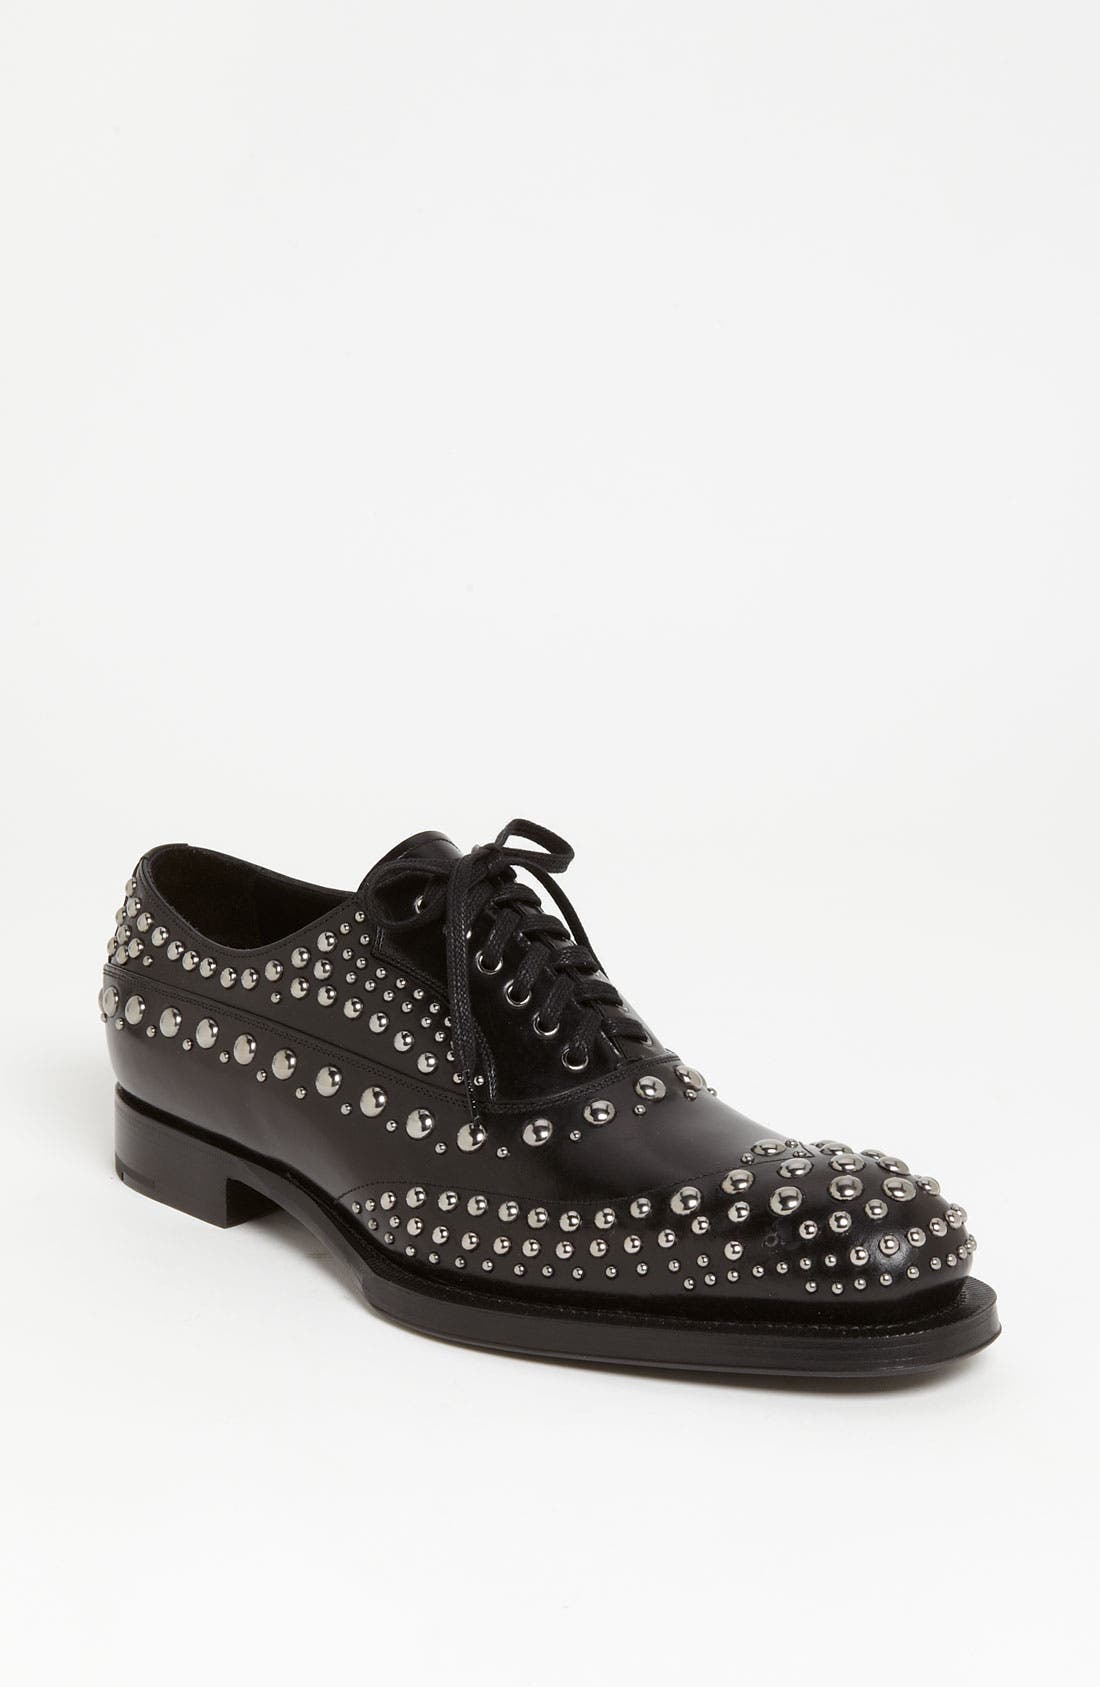 studded oxford shoes